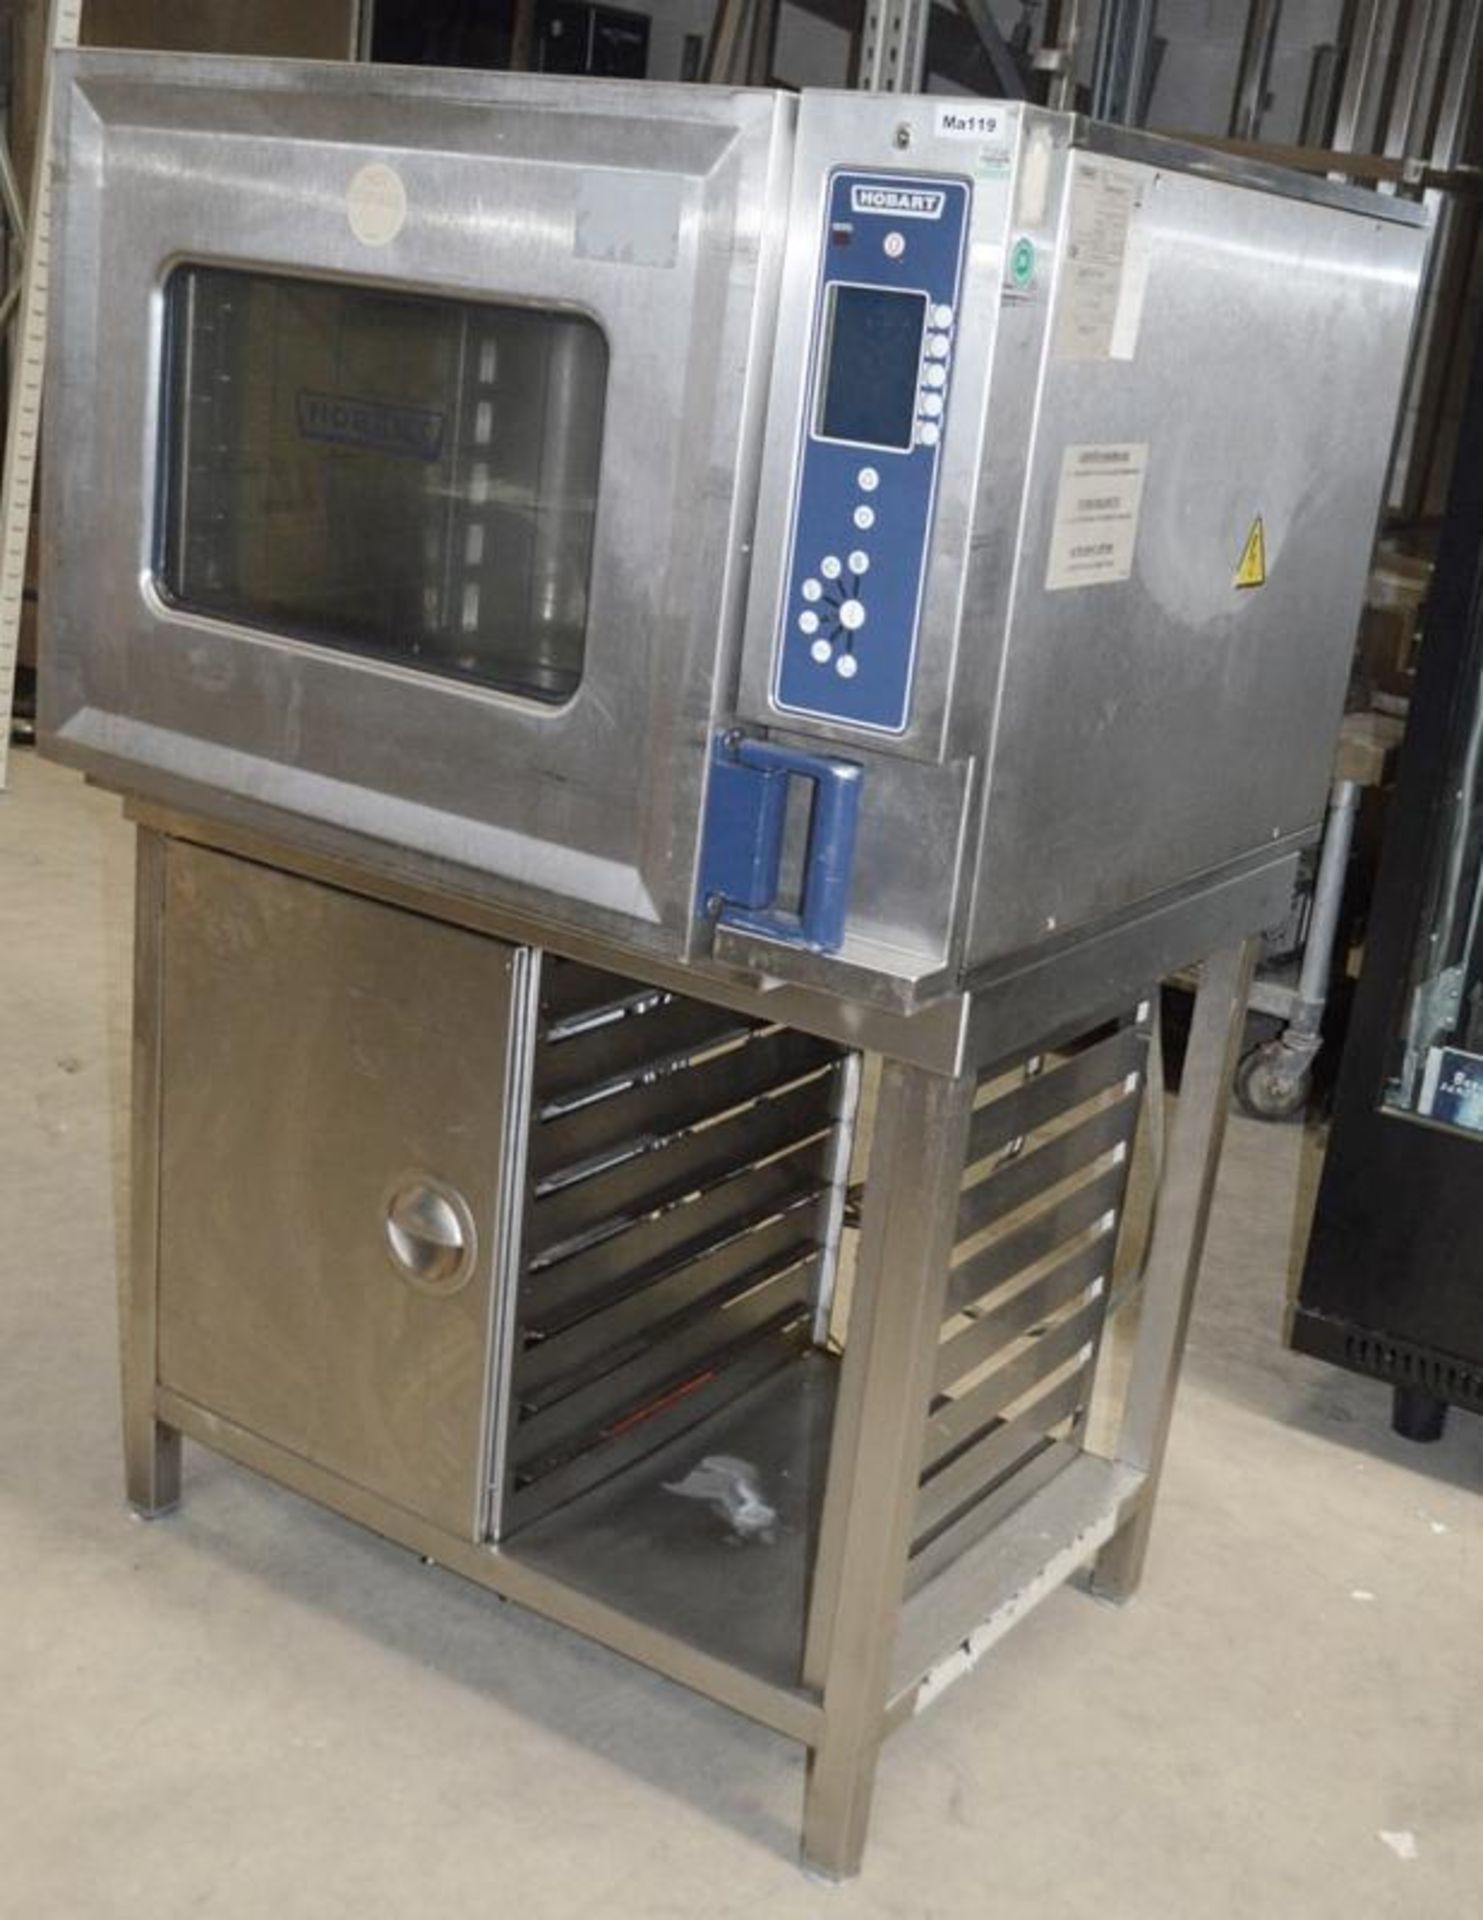 1 x HOBART CSDUC 6-Grid Combi Oven With Stand - 3 phase - Dimensions: H140 x W90 x D90cm - Stainless - Image 4 of 11